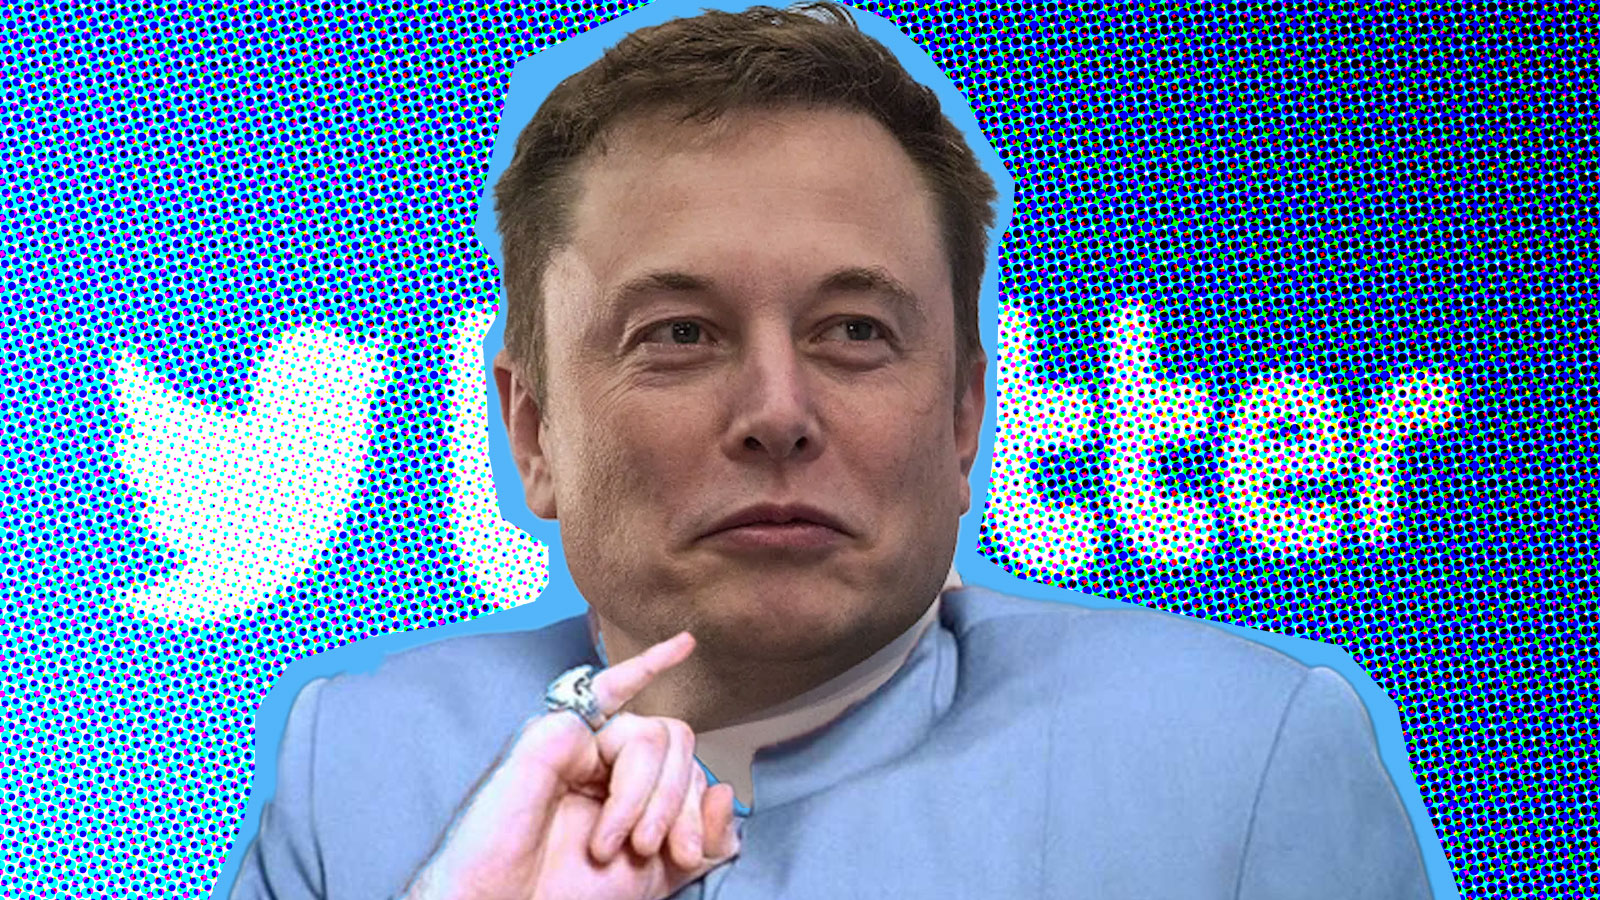 Elon Musk Planning To Replace All Social Media With 'Everything App’